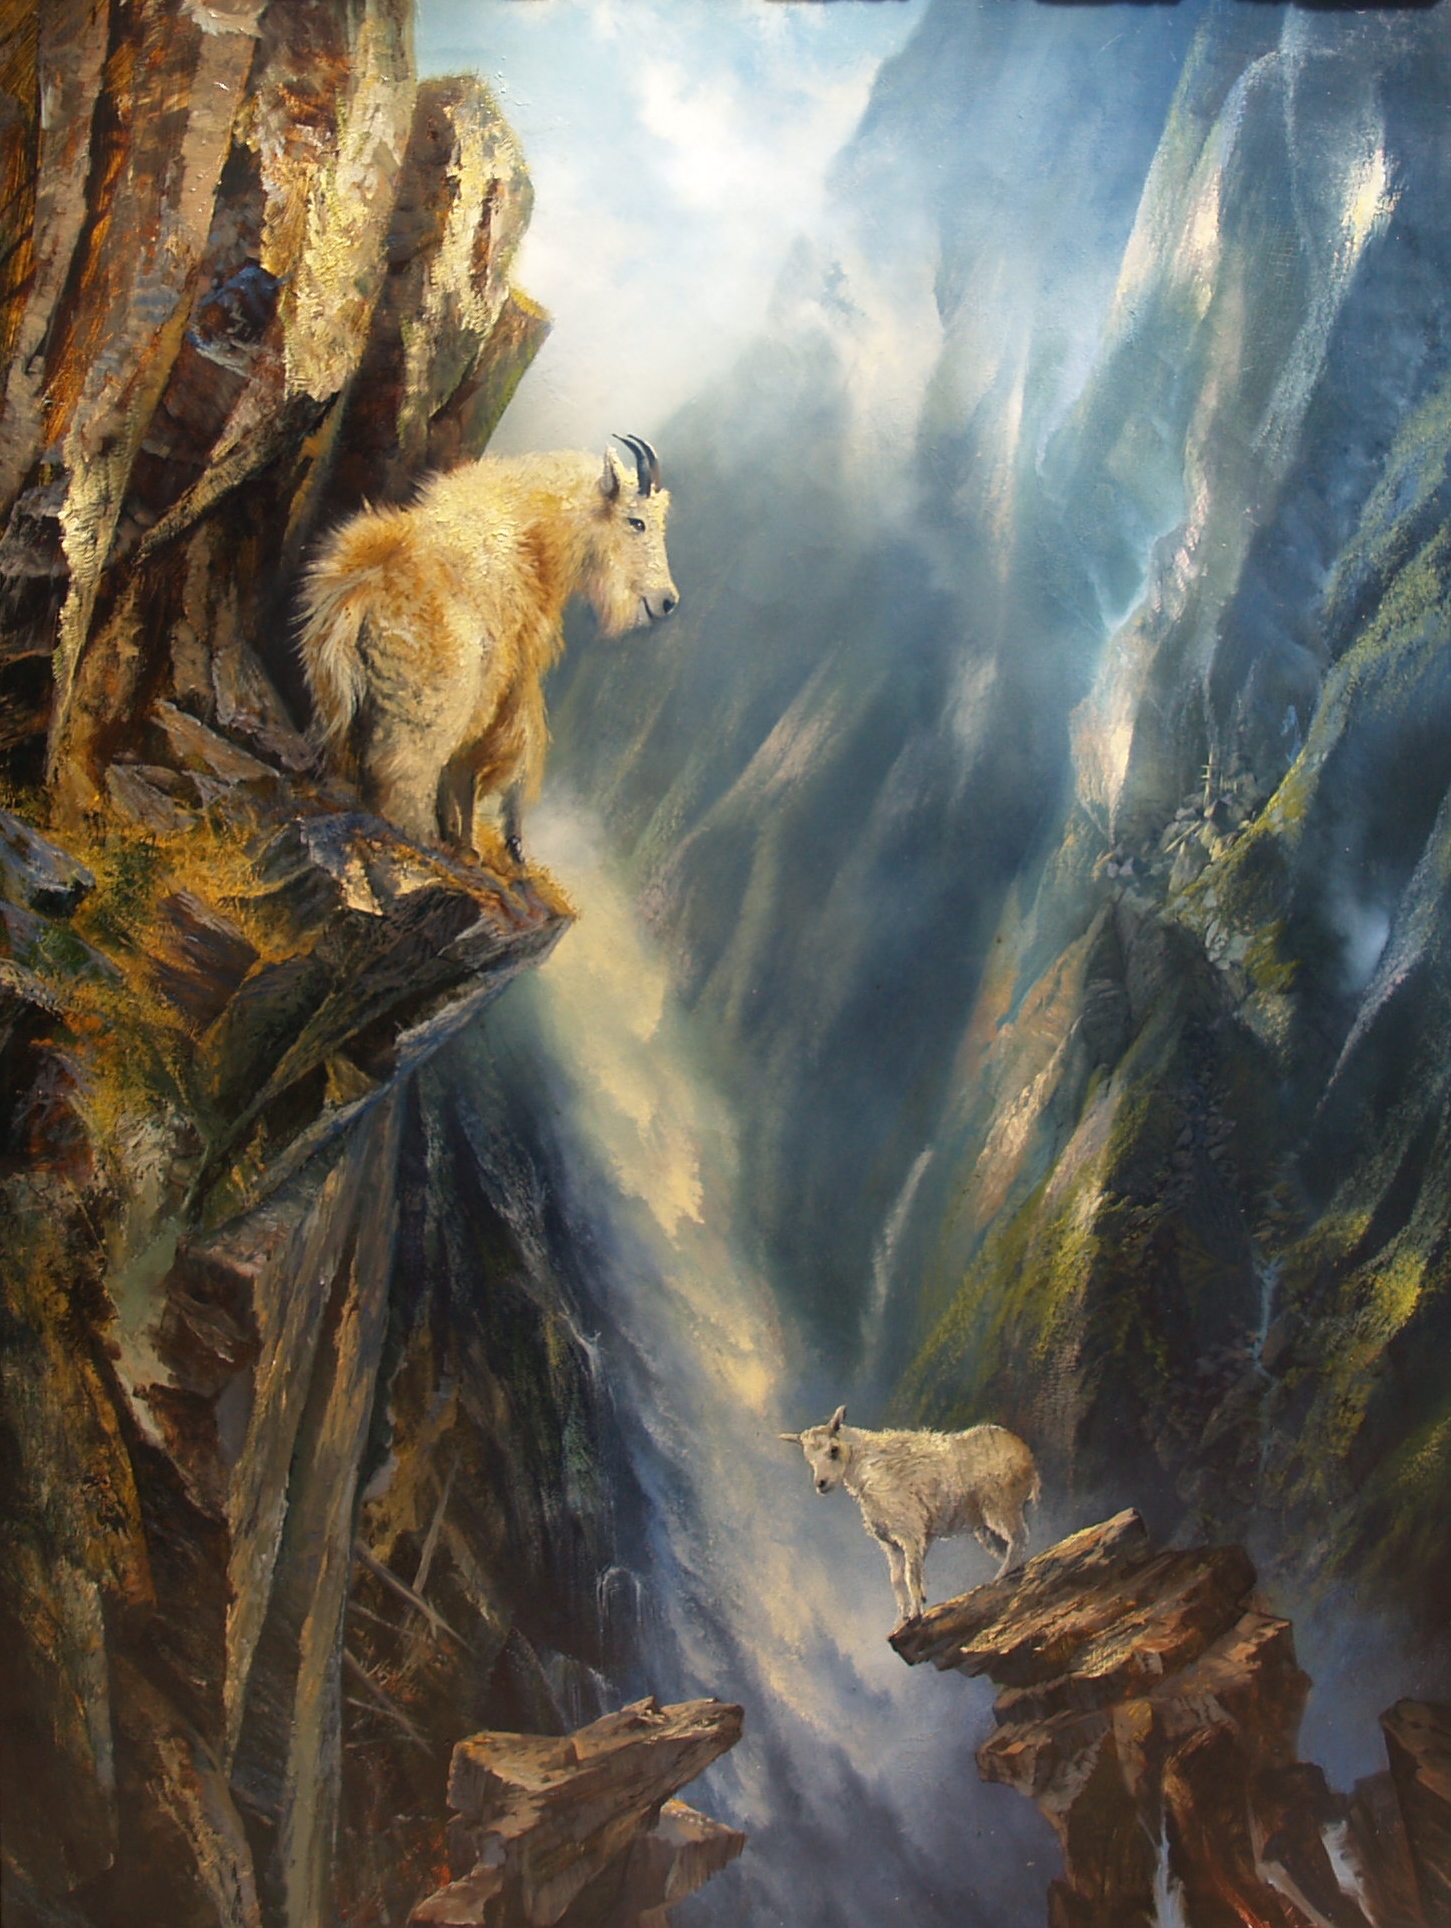 This is a an oil painting of a young Mountain Goat who is learning to leap from rock to rock by Stefan Baumann from his imagination.